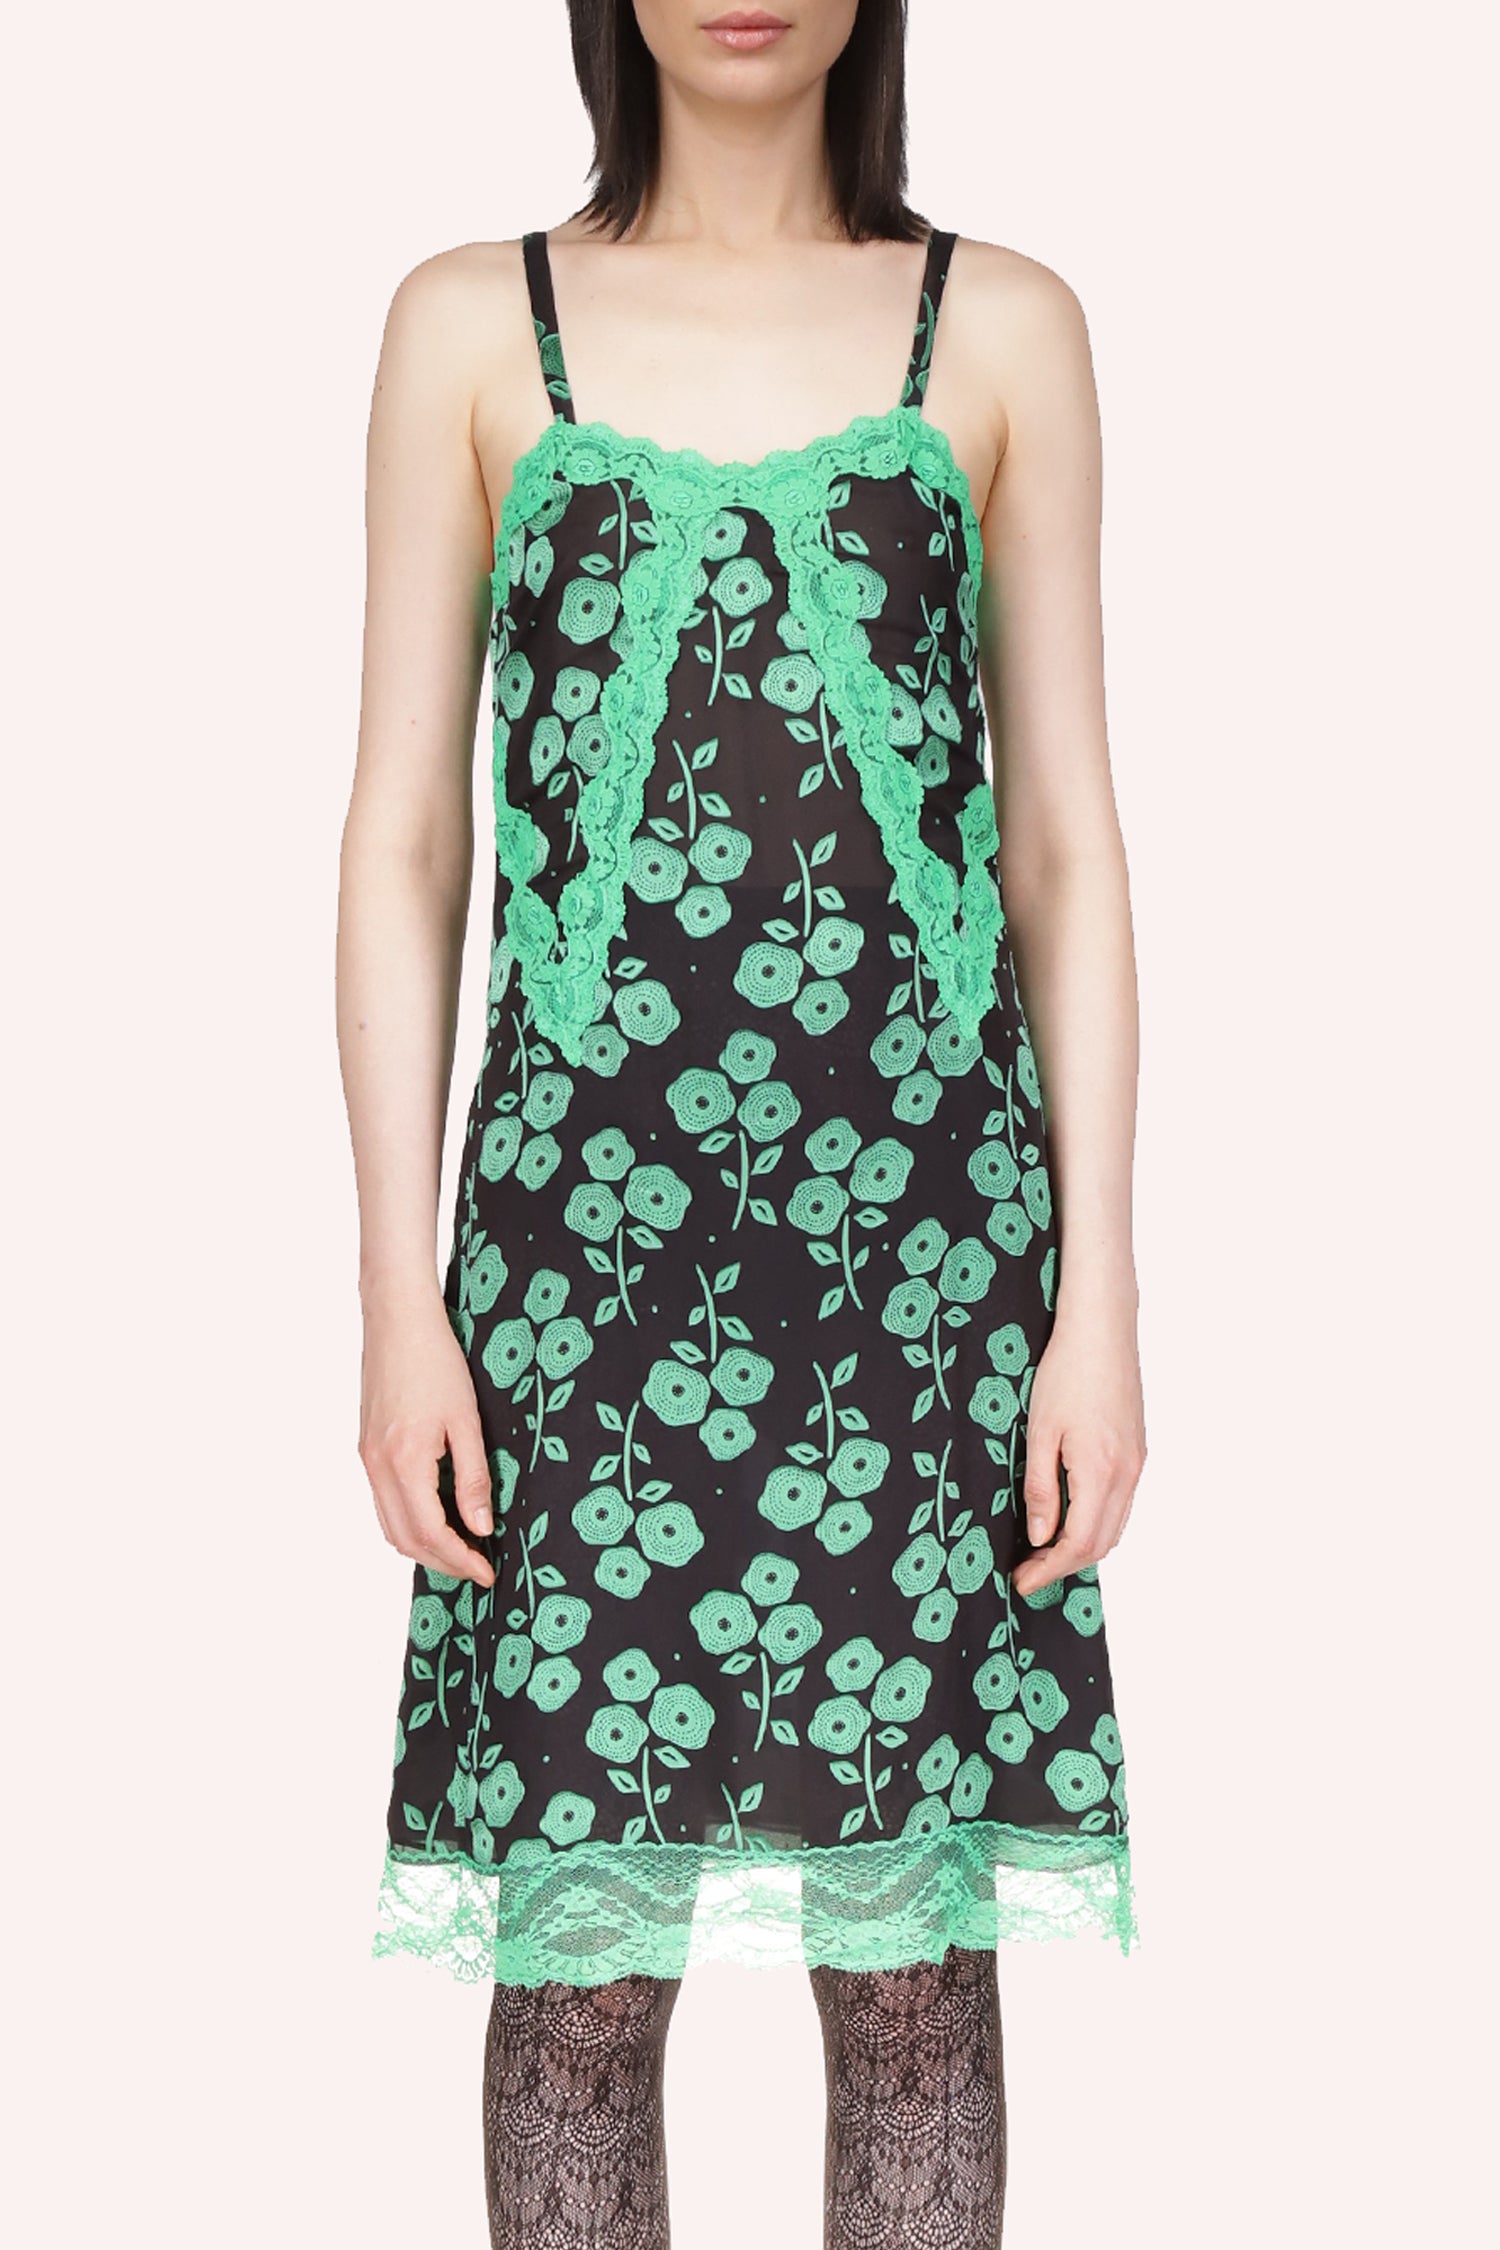 Black dress, green floral pattern, green v-lace, sleeveless, 2-straps, knees-long, green lace at the bottom